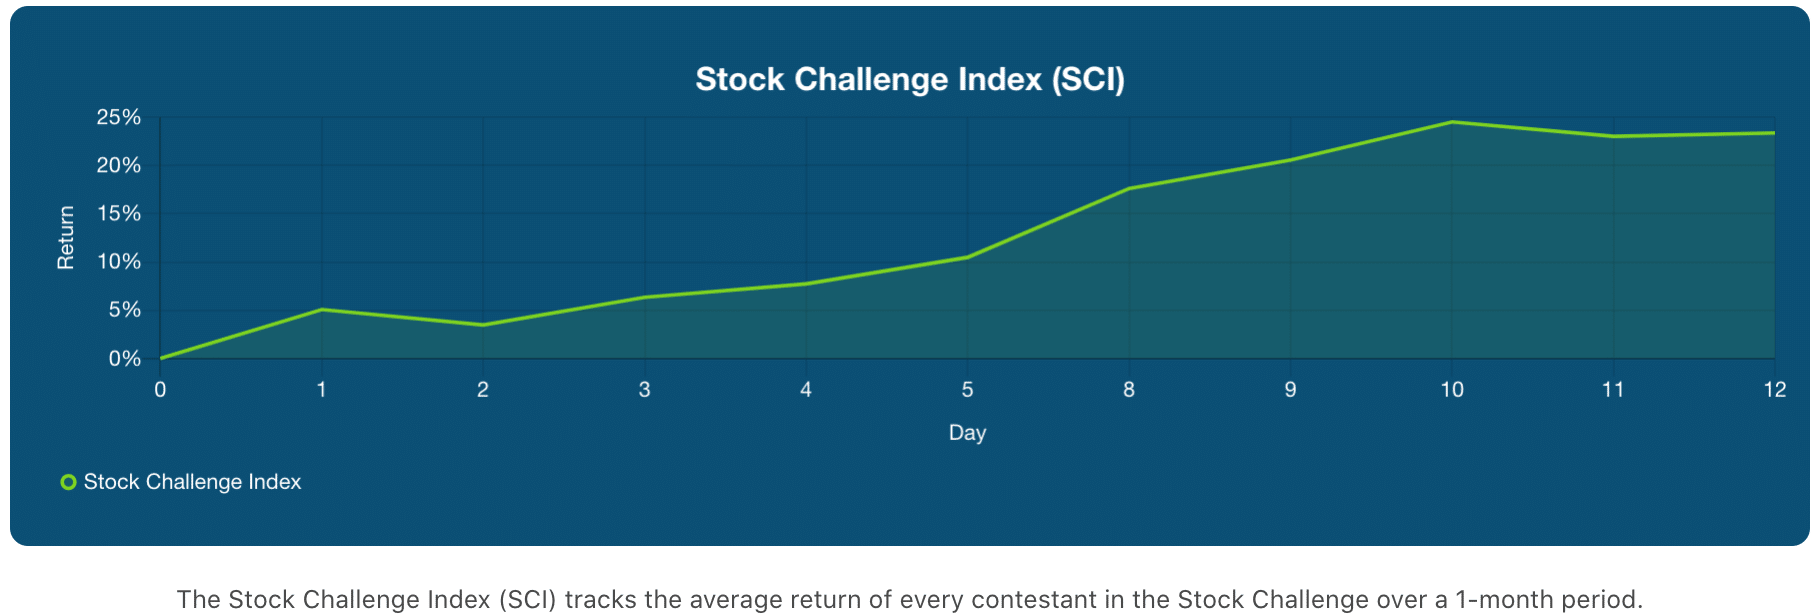 stock challenge index as of february 15, 2021